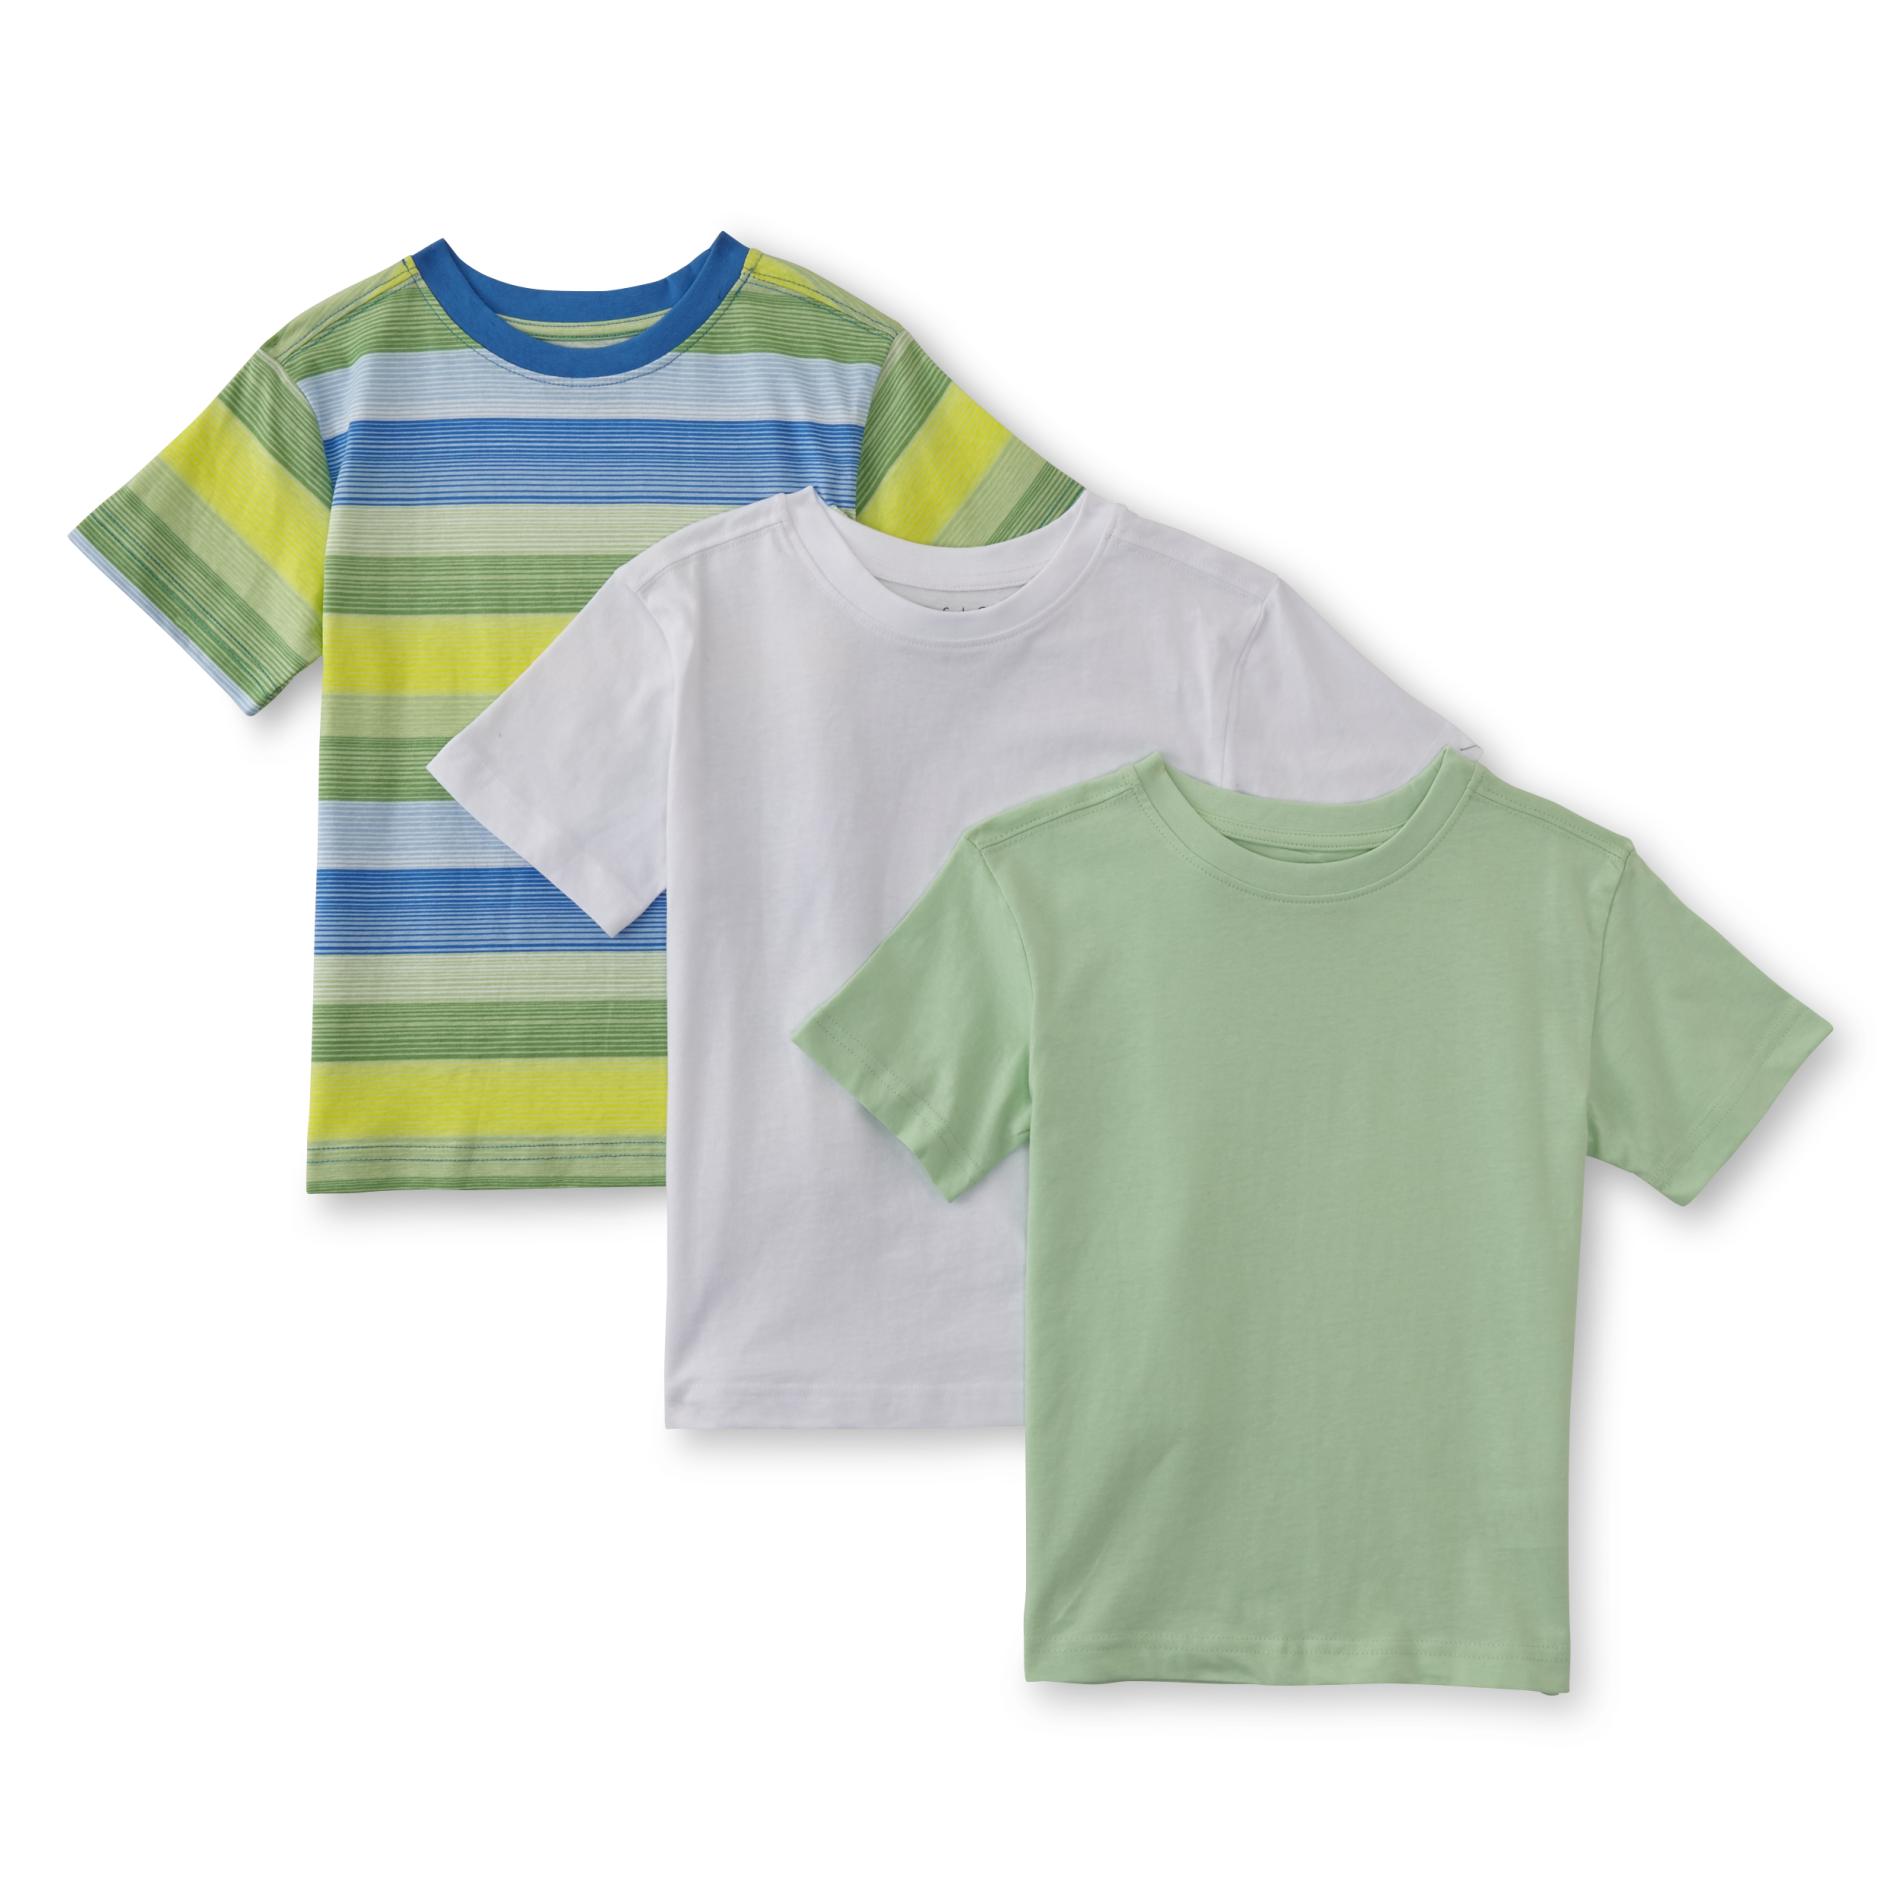 Basic Editions Boys' 3-Pack Crew Neck T-Shirts - Striped